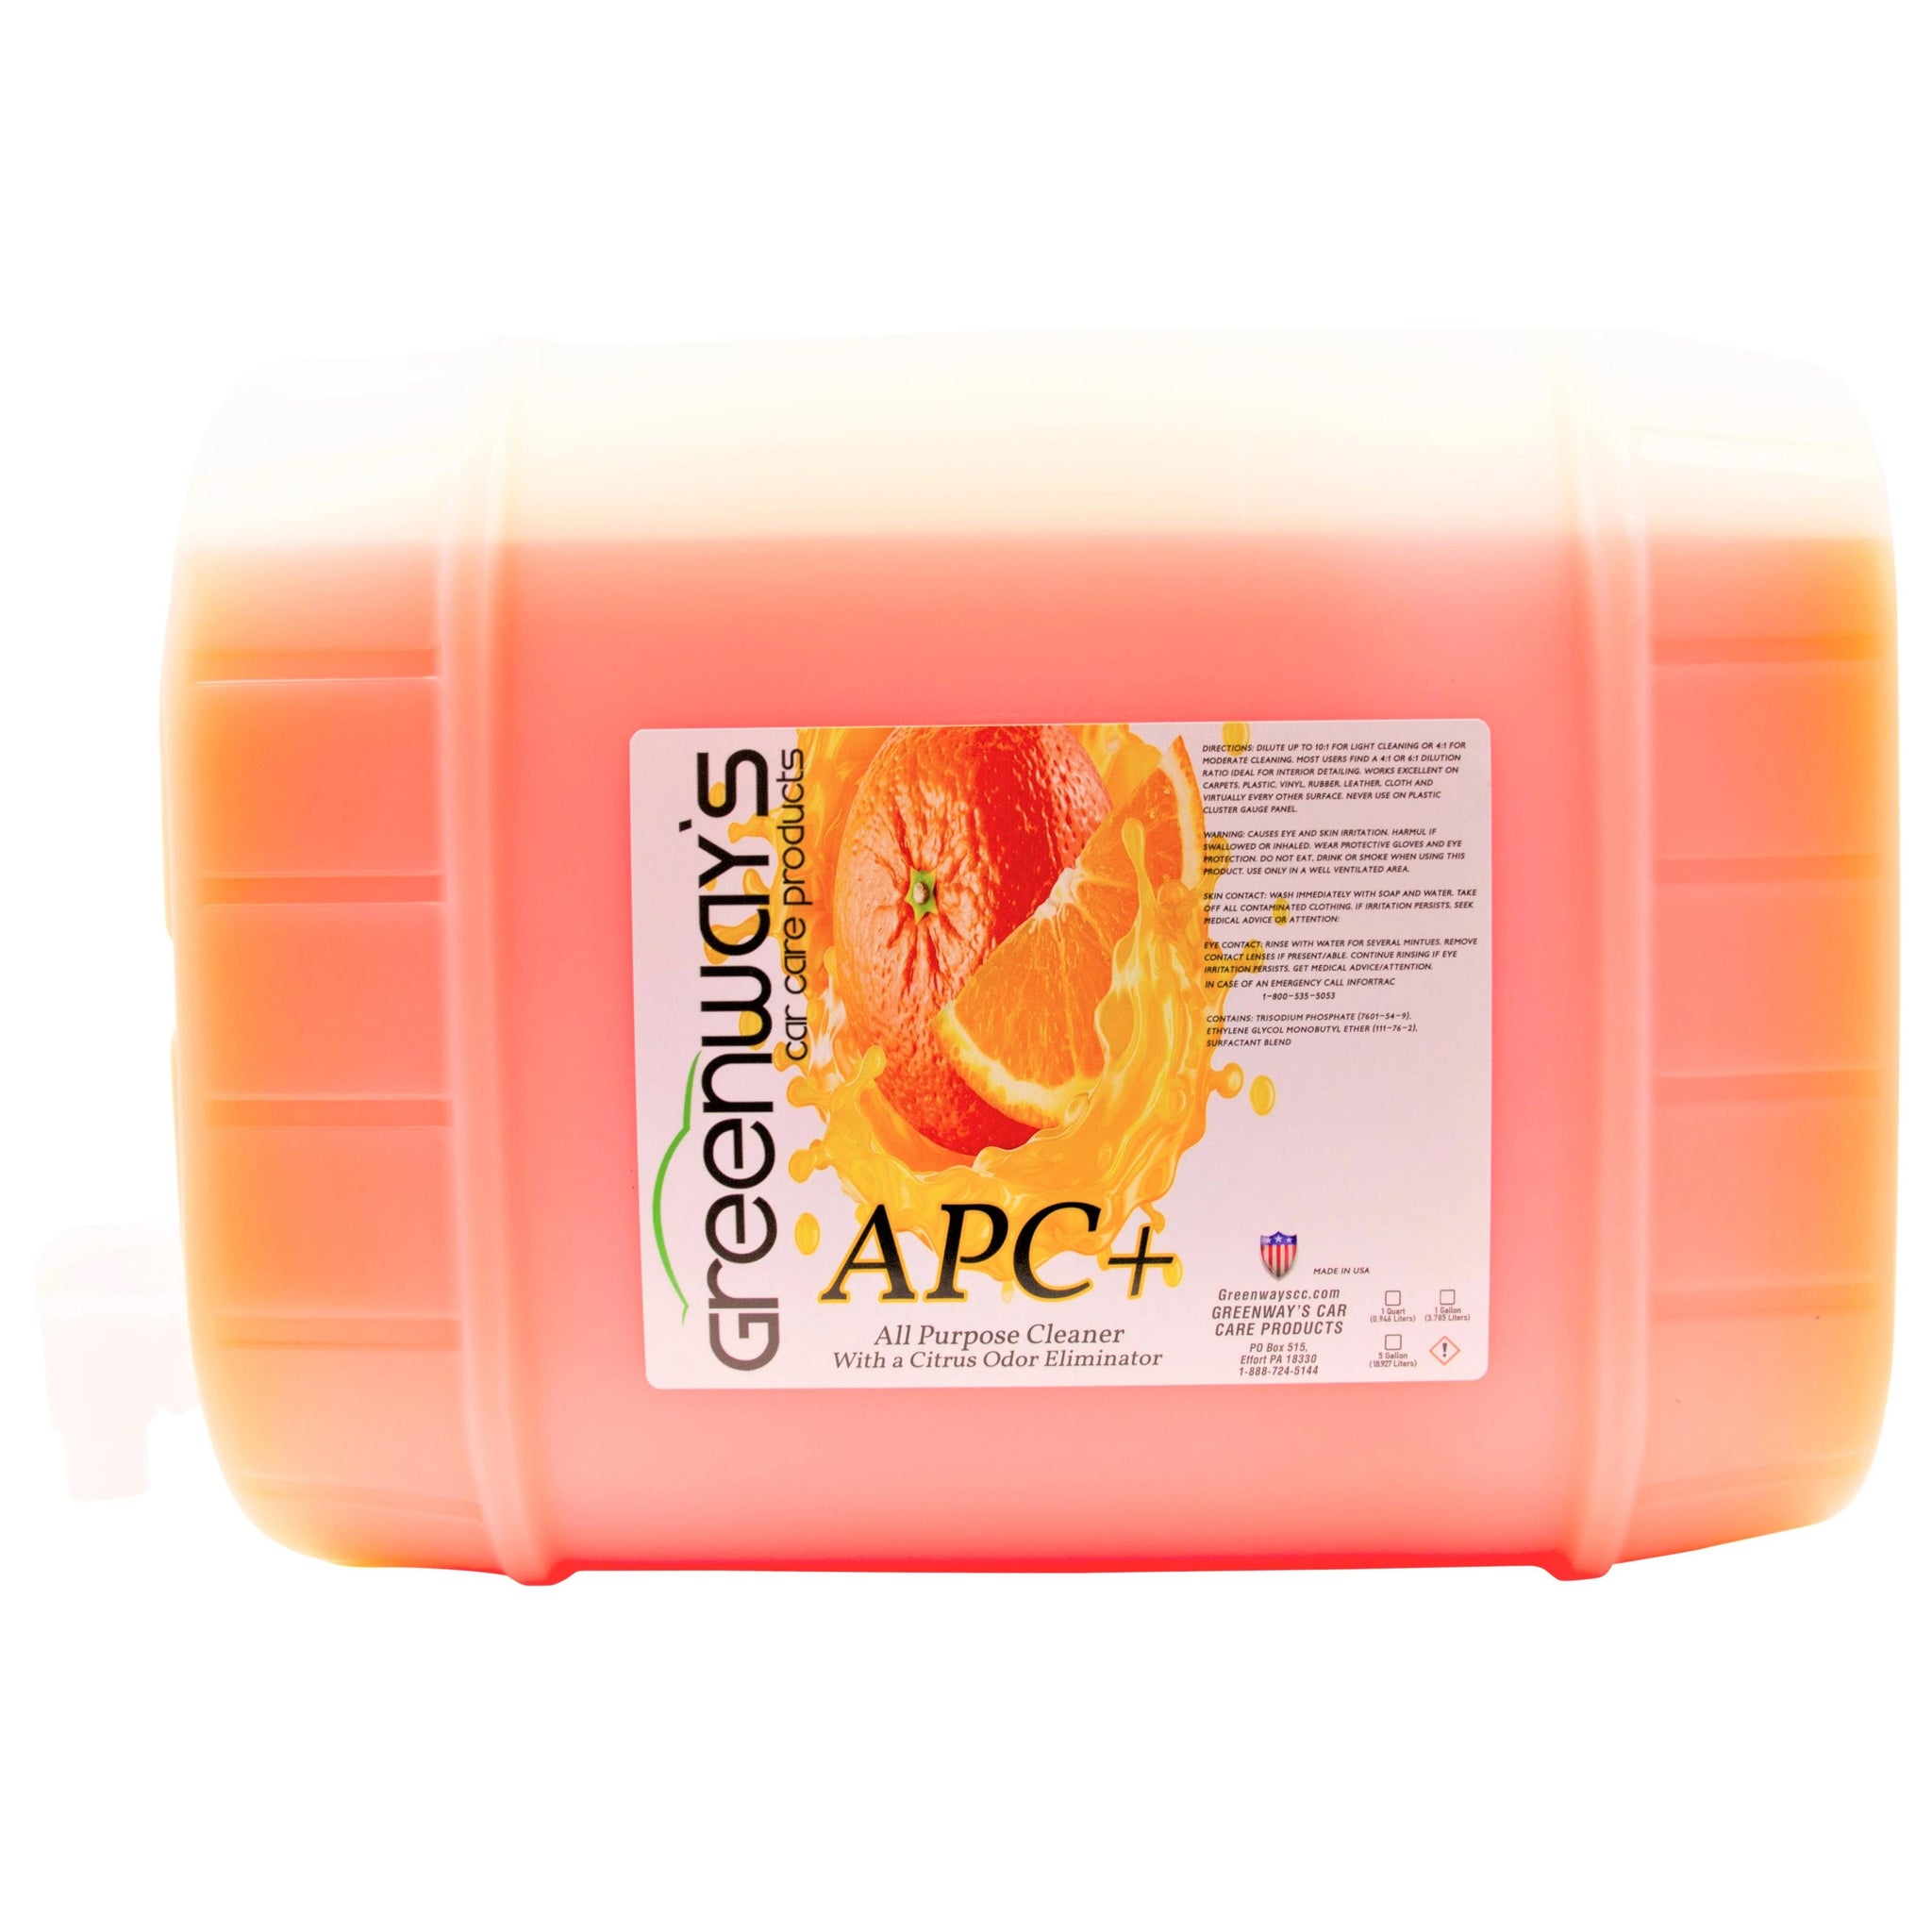 Greenway’s APC+, butyl-free all-purpose car interior deep cleaner with an odor eliminator, citrus-scented, 5 gallons.